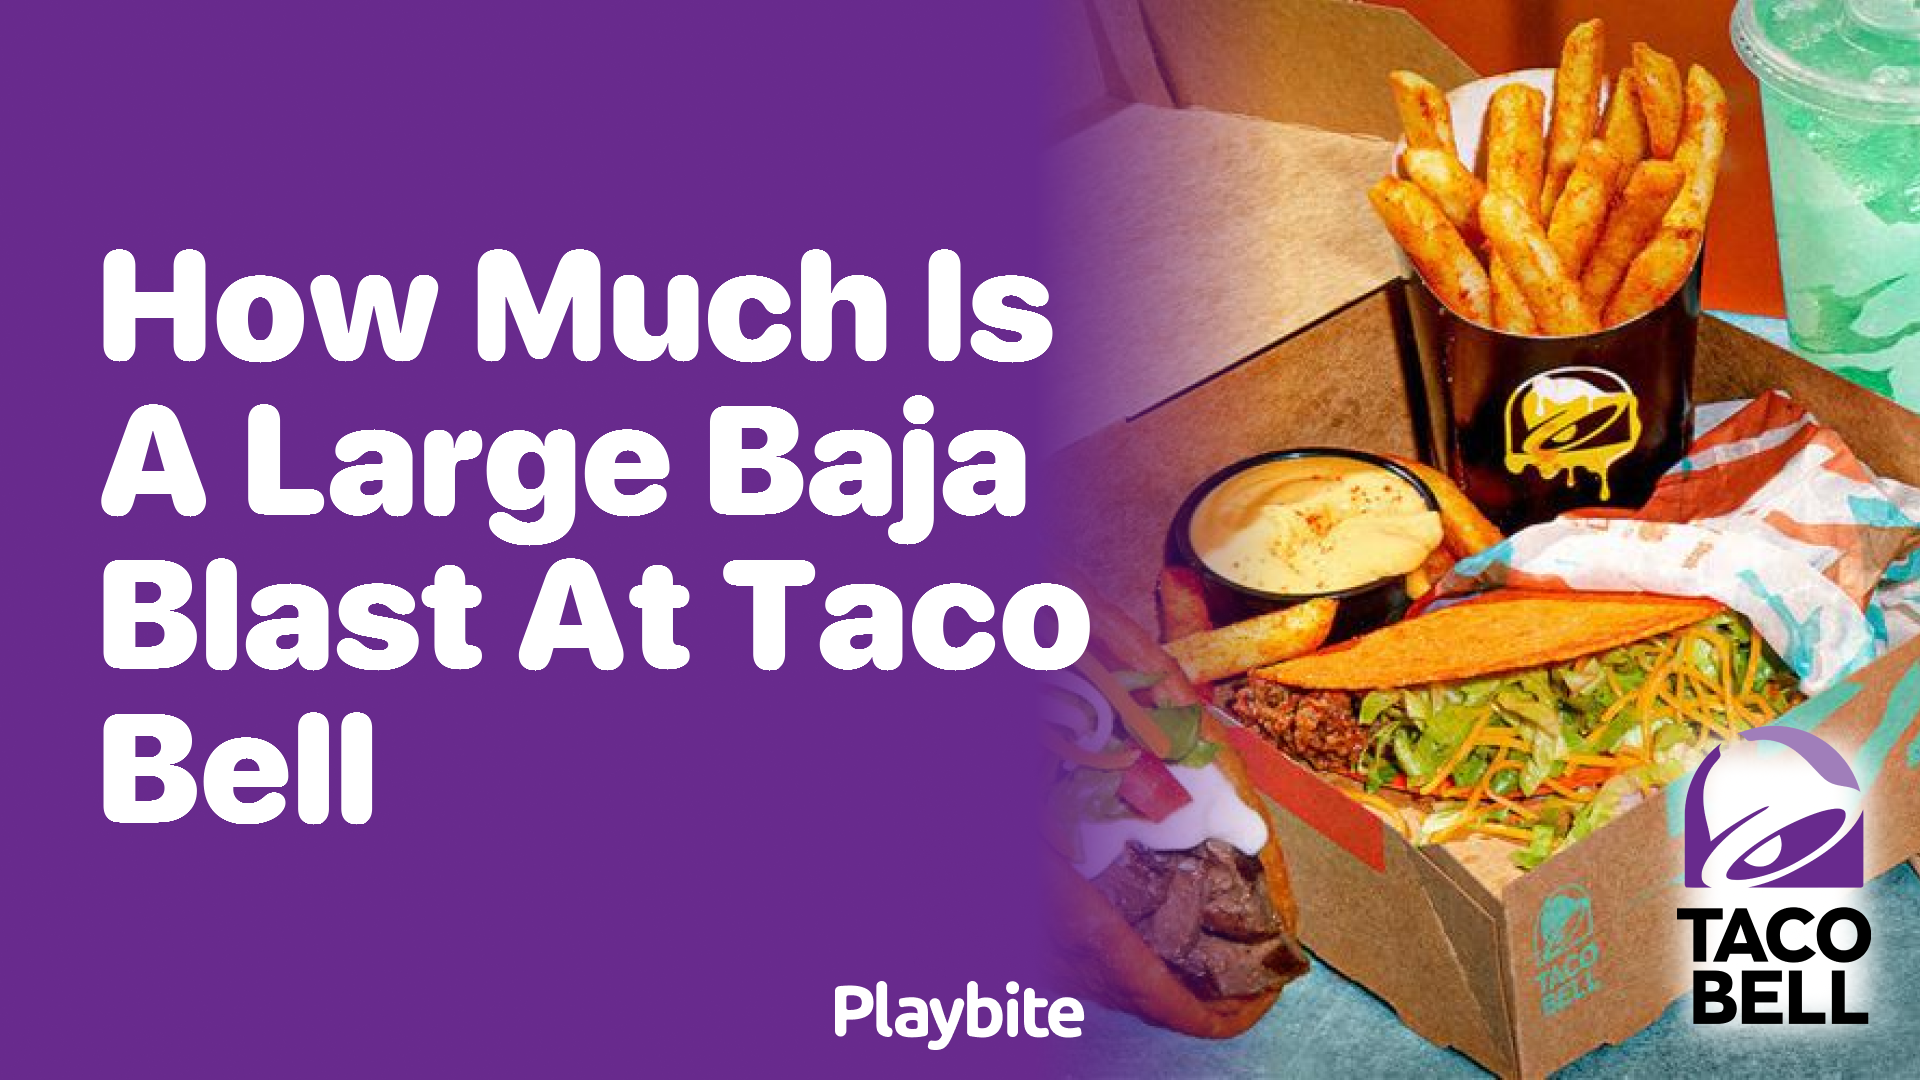 How Much Does a Large Baja Blast Cost at Taco Bell?